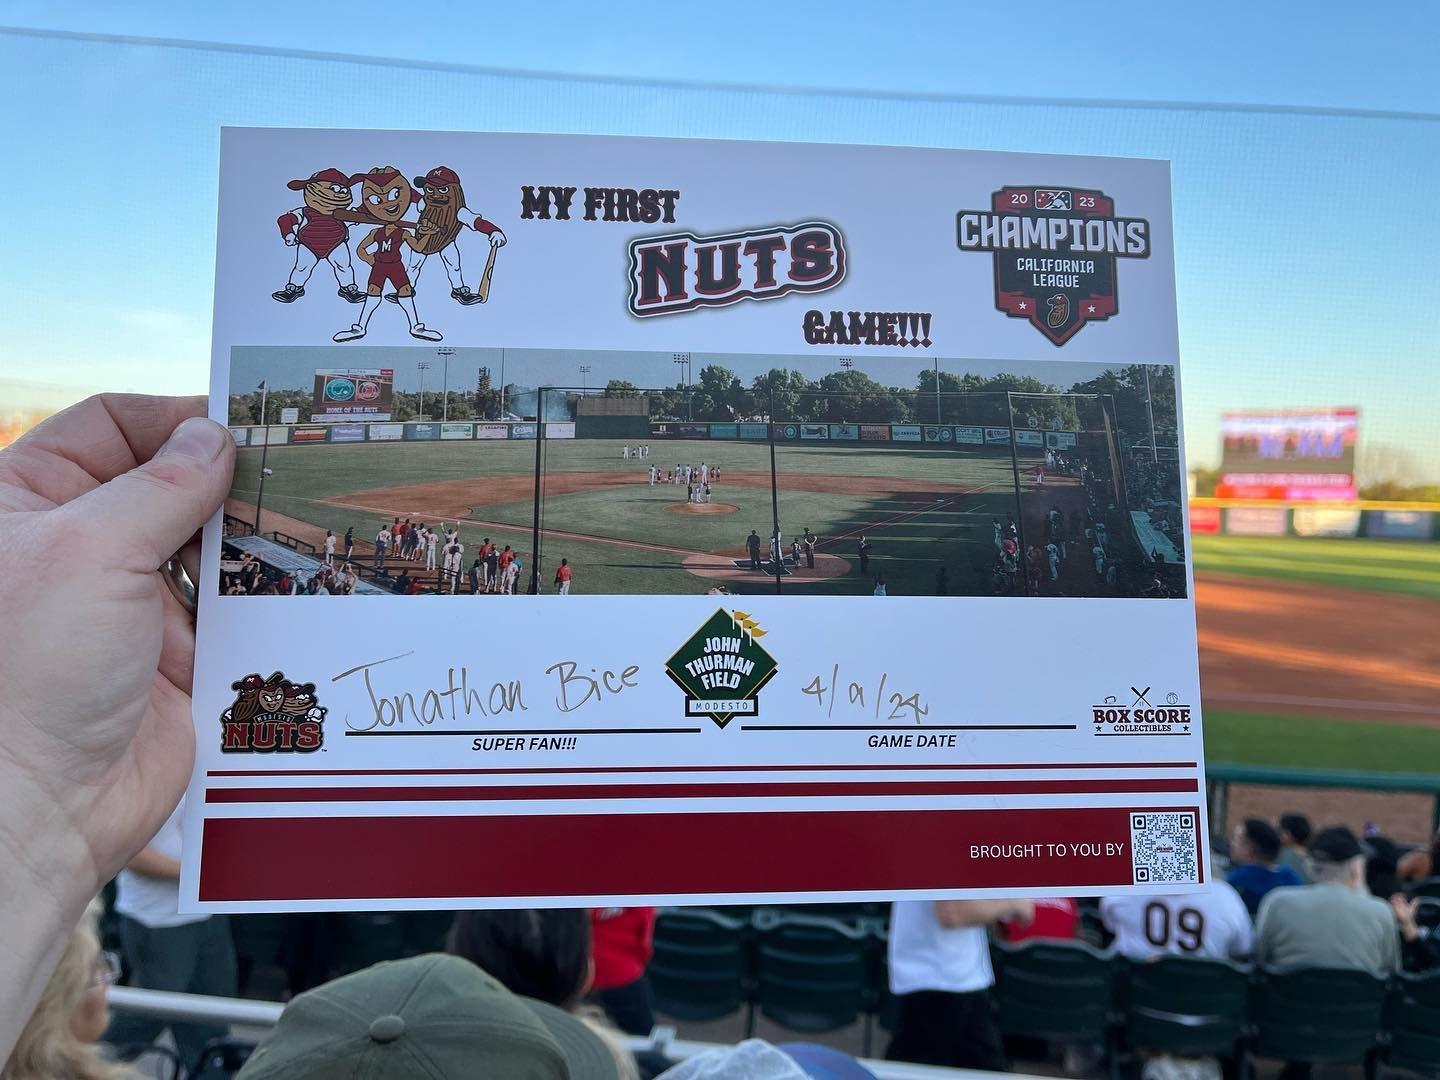 We are excited to announce that we have partnered with the @modestonuts to bring you the First Game Certificate and Pin! If you or anyone you know are attending a Nuts game for the first time stop by the customer service booth and ask for your first 